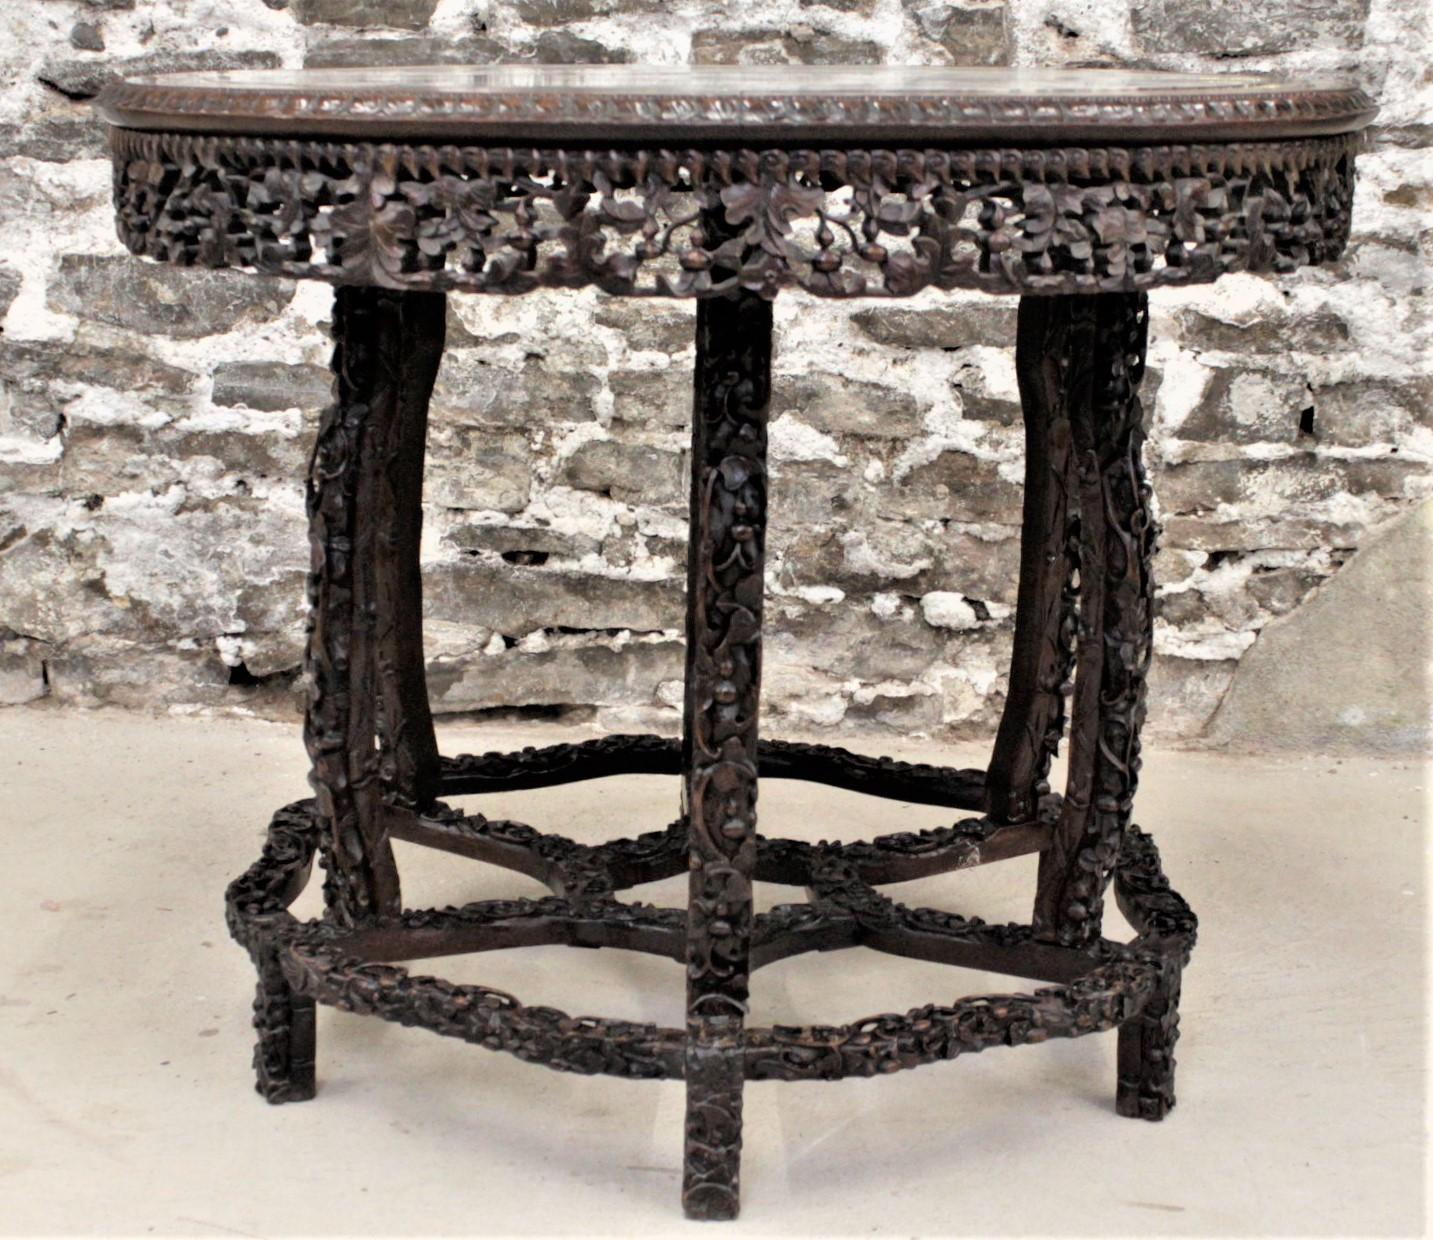 20th Century Antique Chinese Hand-Carved Hardwood Center Table with Dream Stone Inset Top